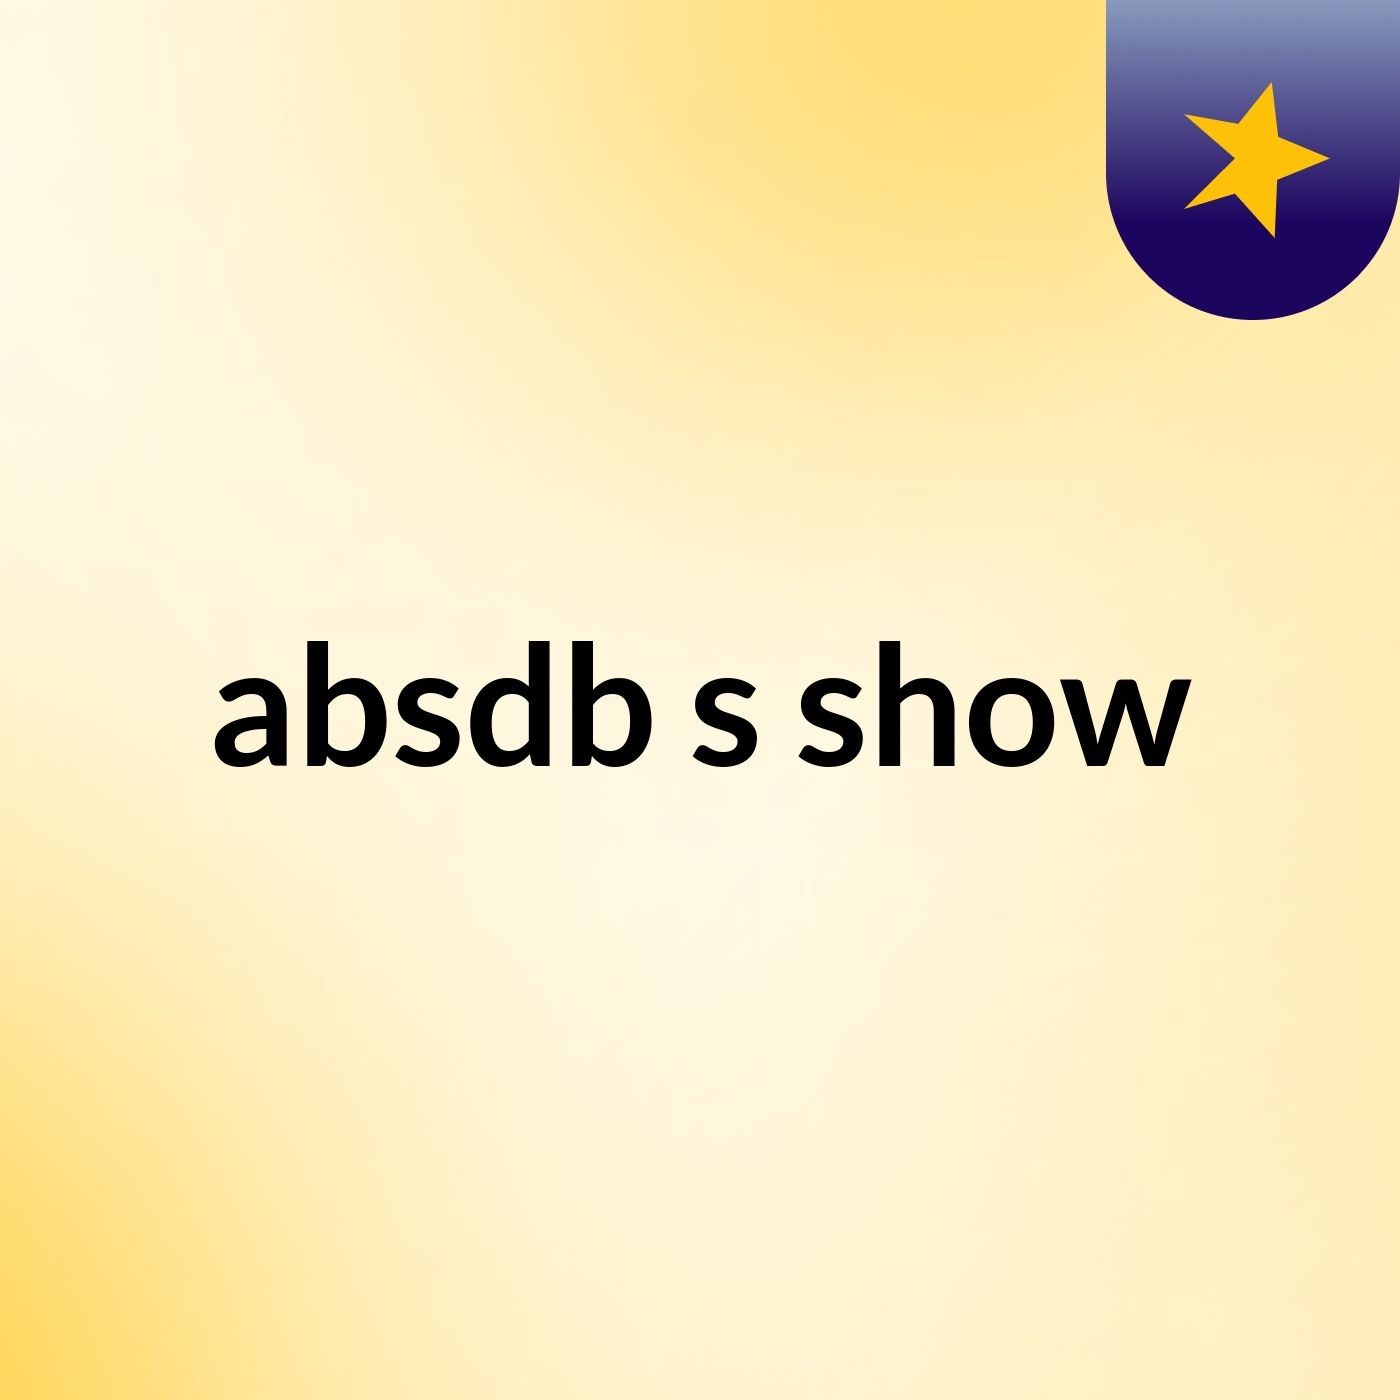 absdb's show